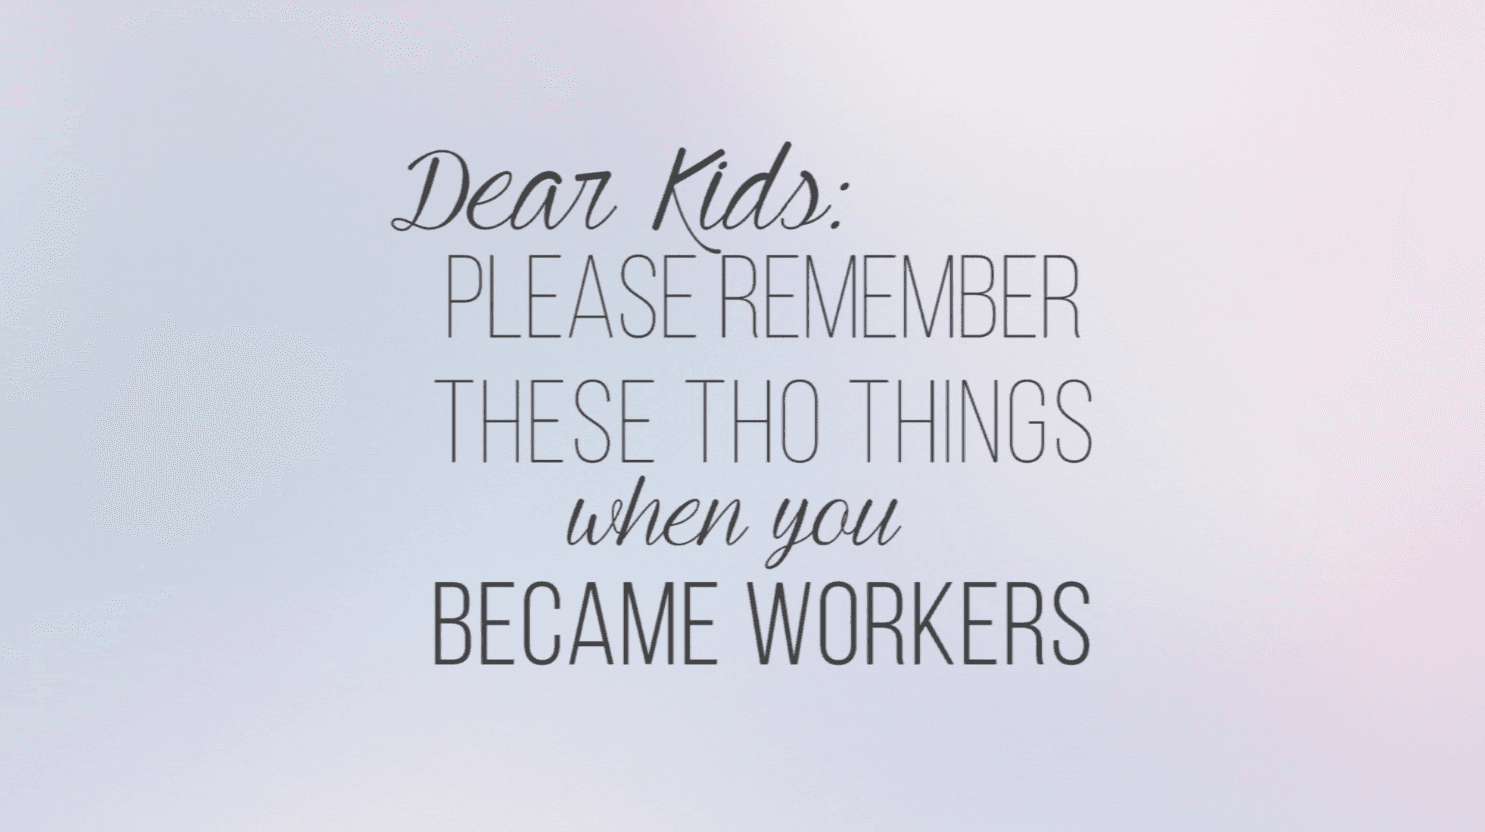 Dear Kids: Please Remember These Two Things When You Become Workers